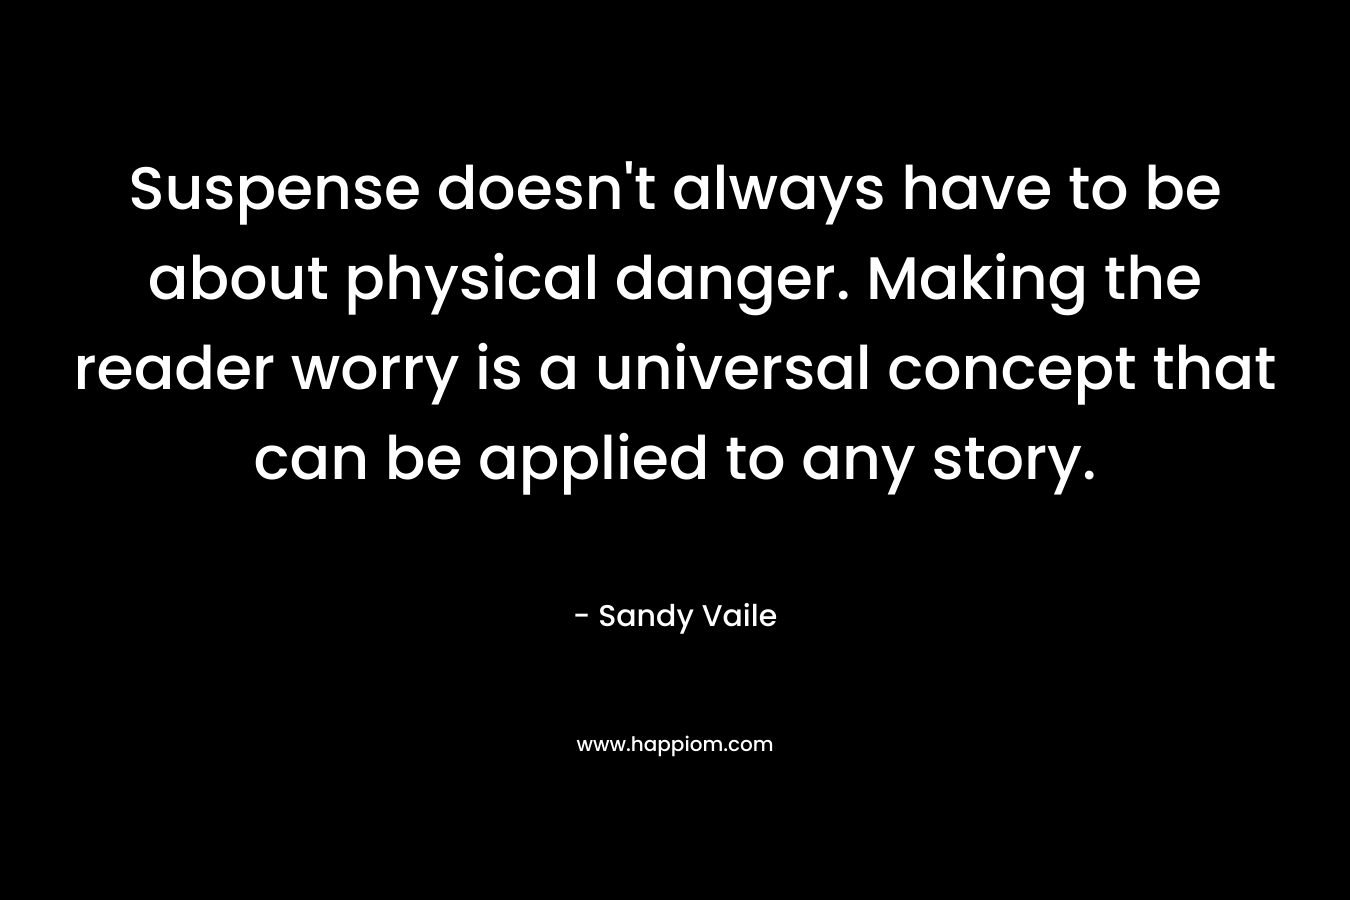 Suspense doesn't always have to be about physical danger. Making the reader worry is a universal concept that can be applied to any story.